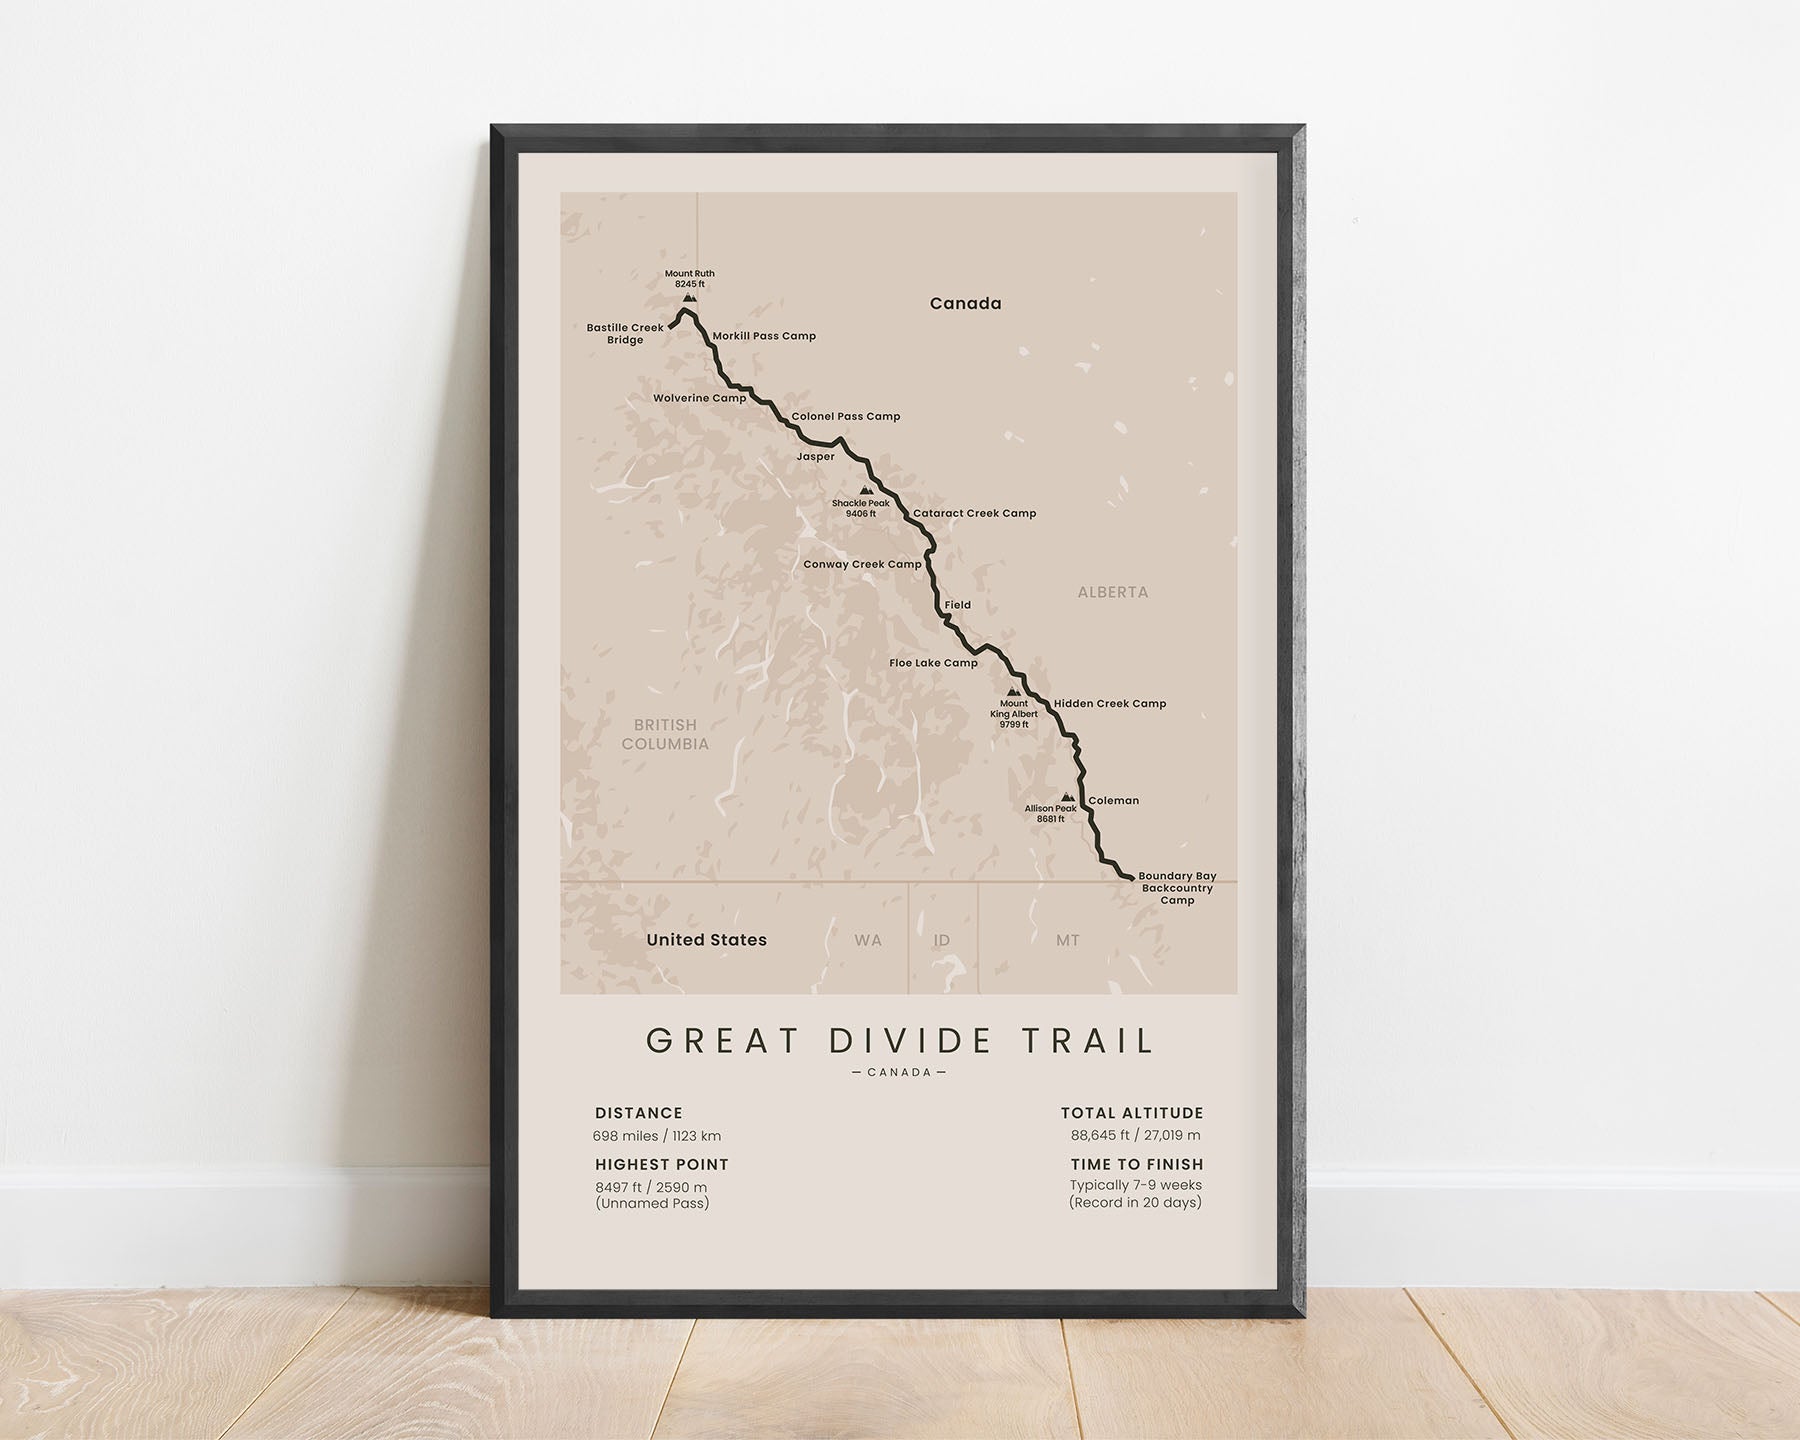 GDT (Alberta) hike wall art with beige background